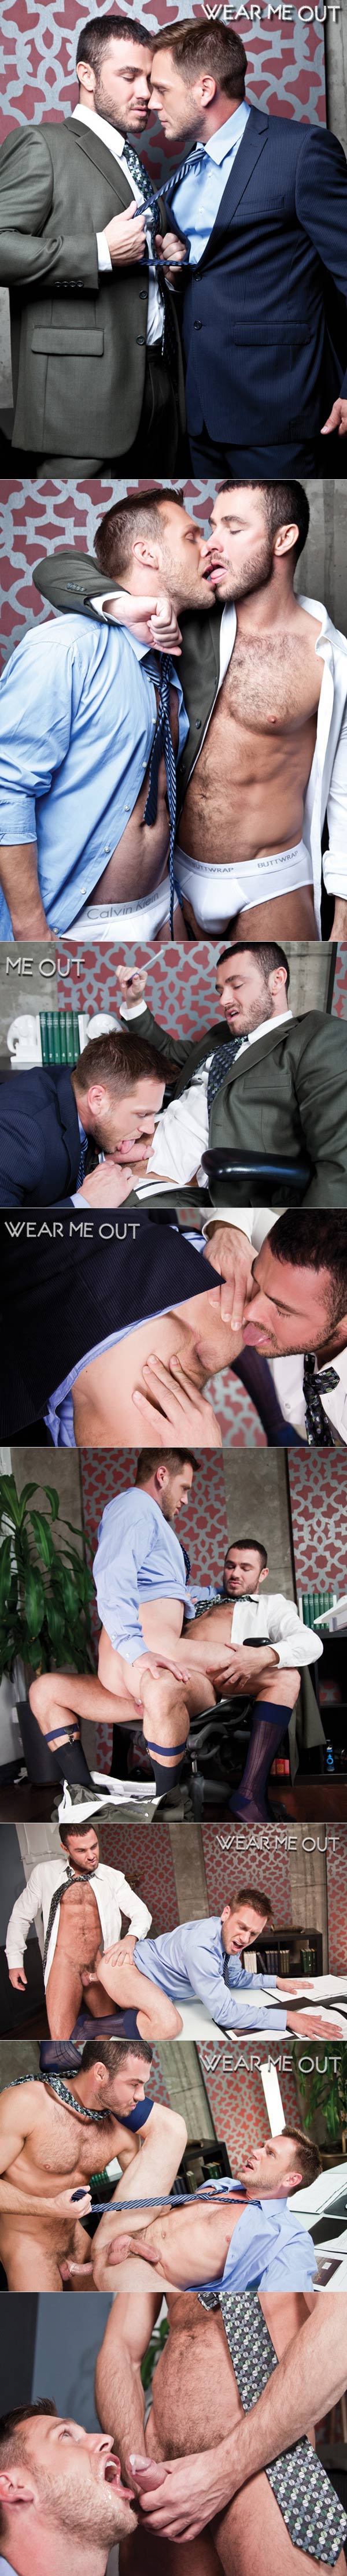 Wear Me Out (Hans Berlin & Jessy Ares) at LucasEntertainment.com